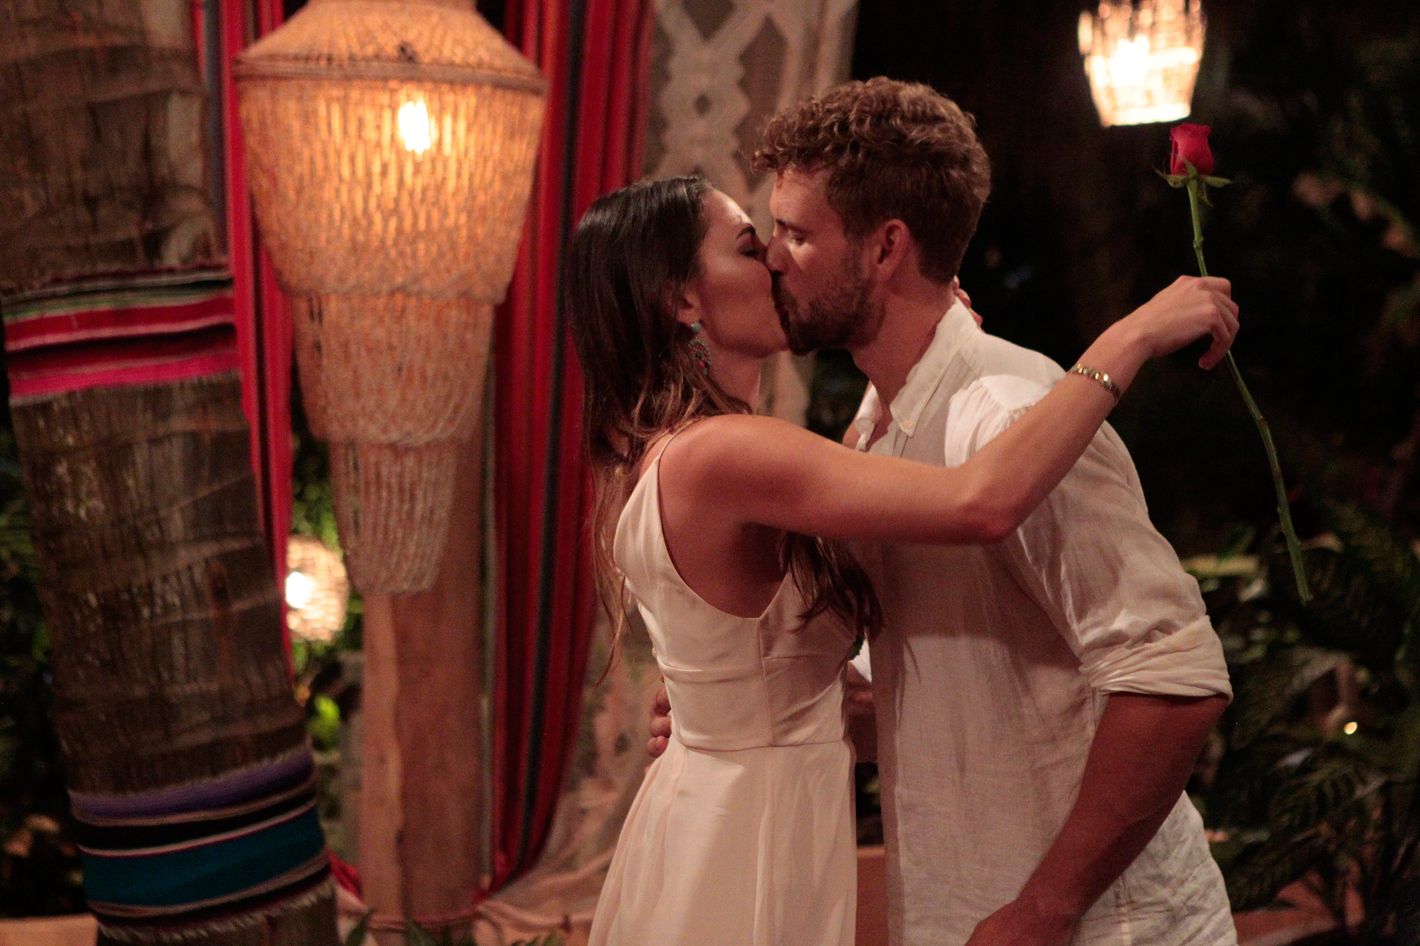 Everything You Need to Know About the Next Bachelor, Nick Viall